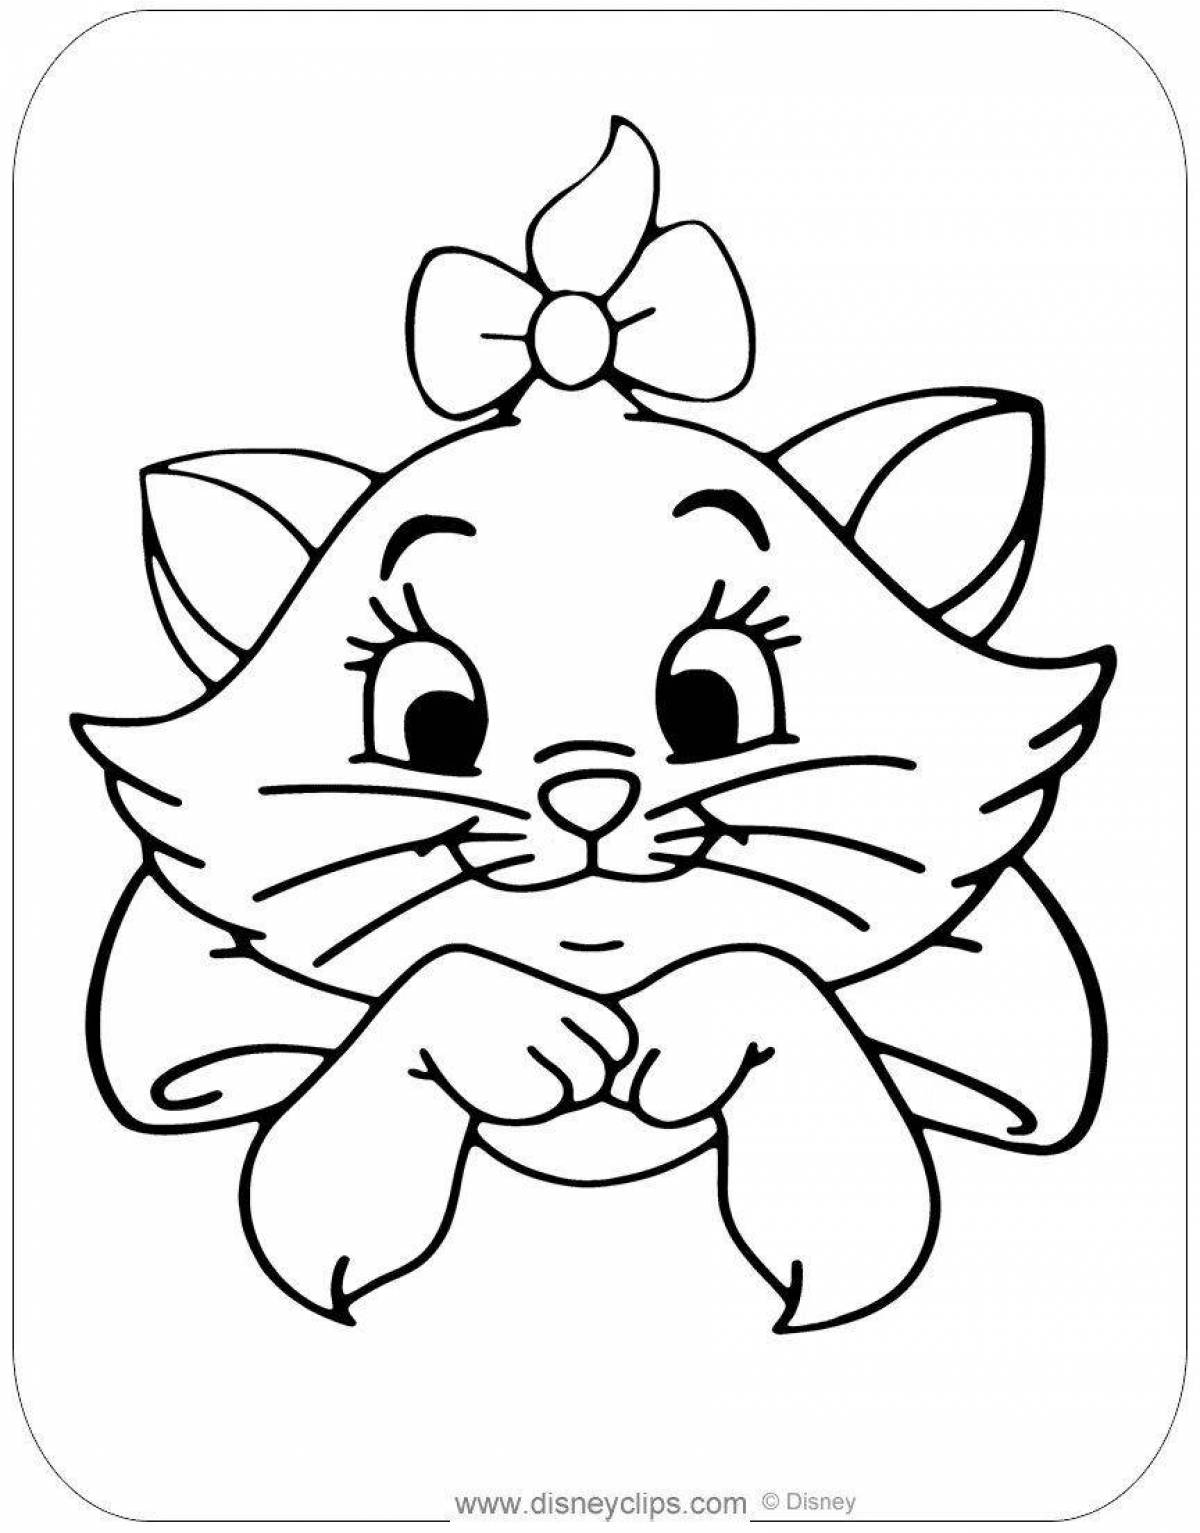 Colouring serene cat with a heart